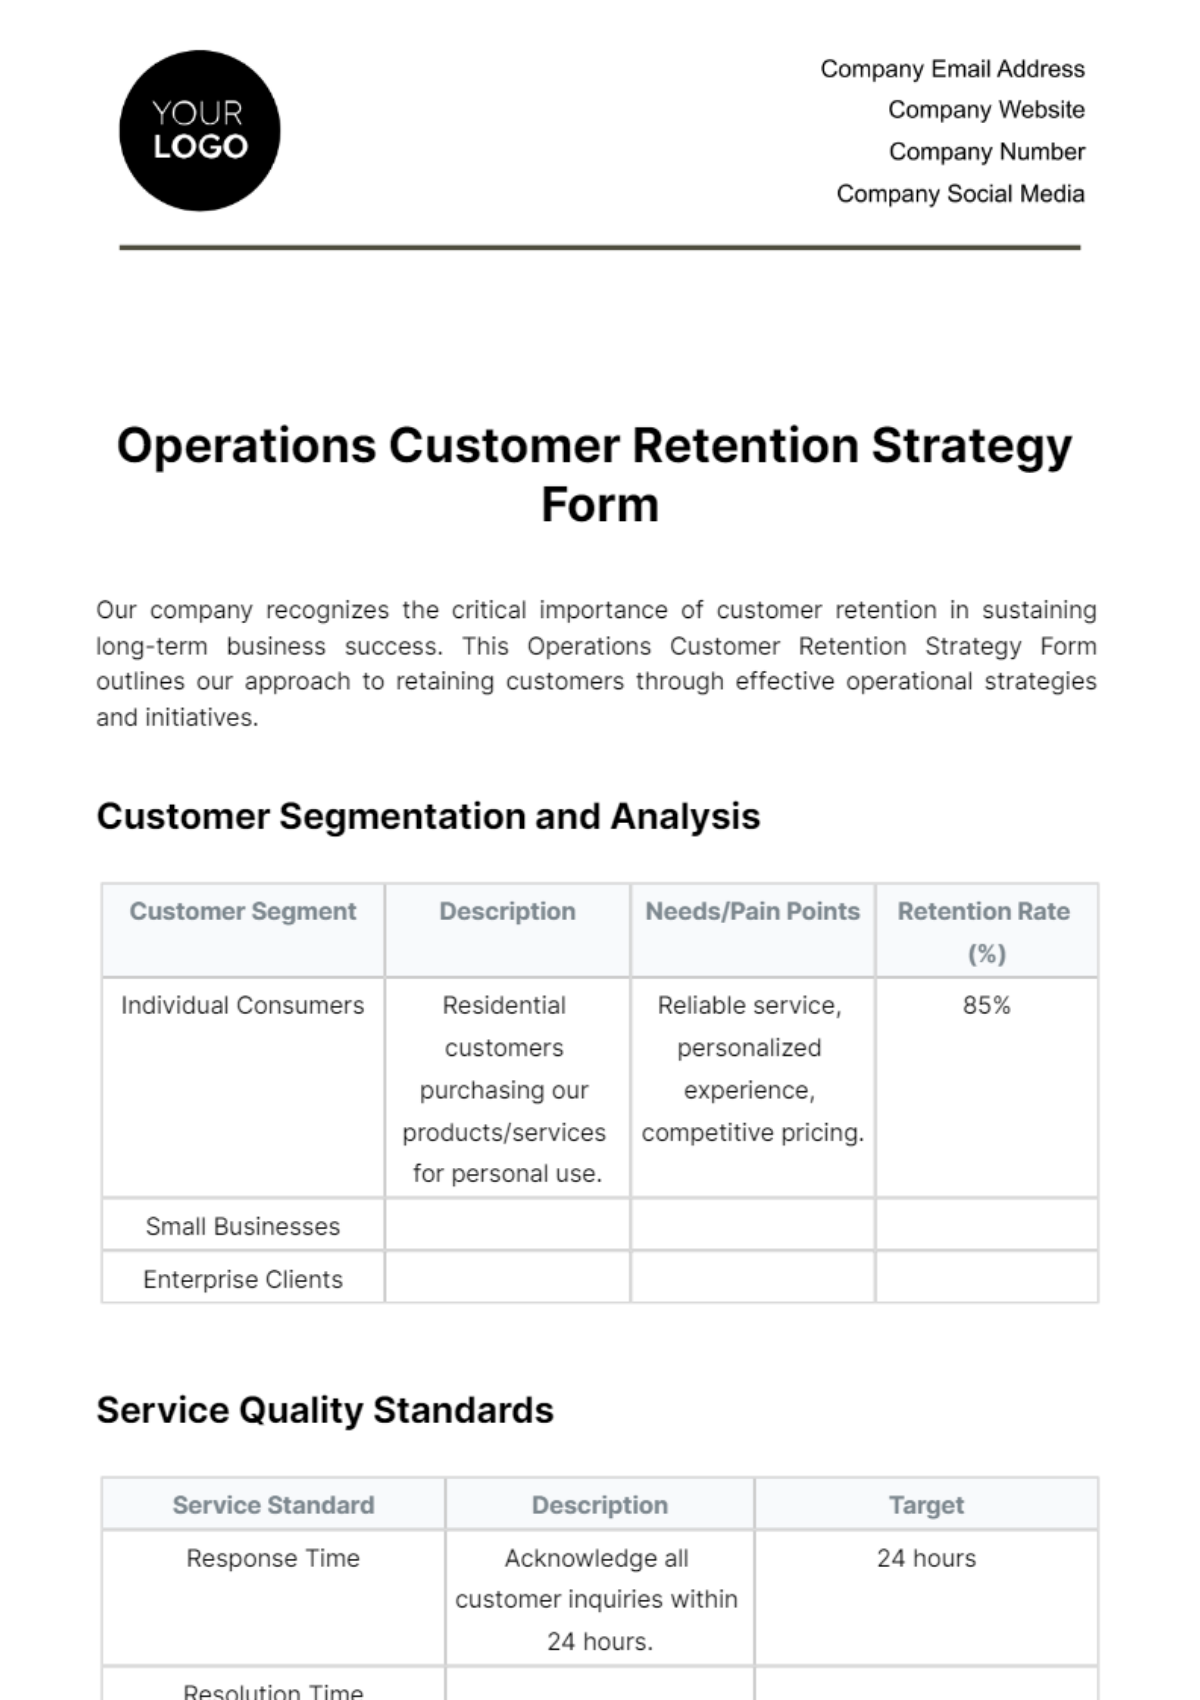 Operations Customer Retention Strategy Form Template